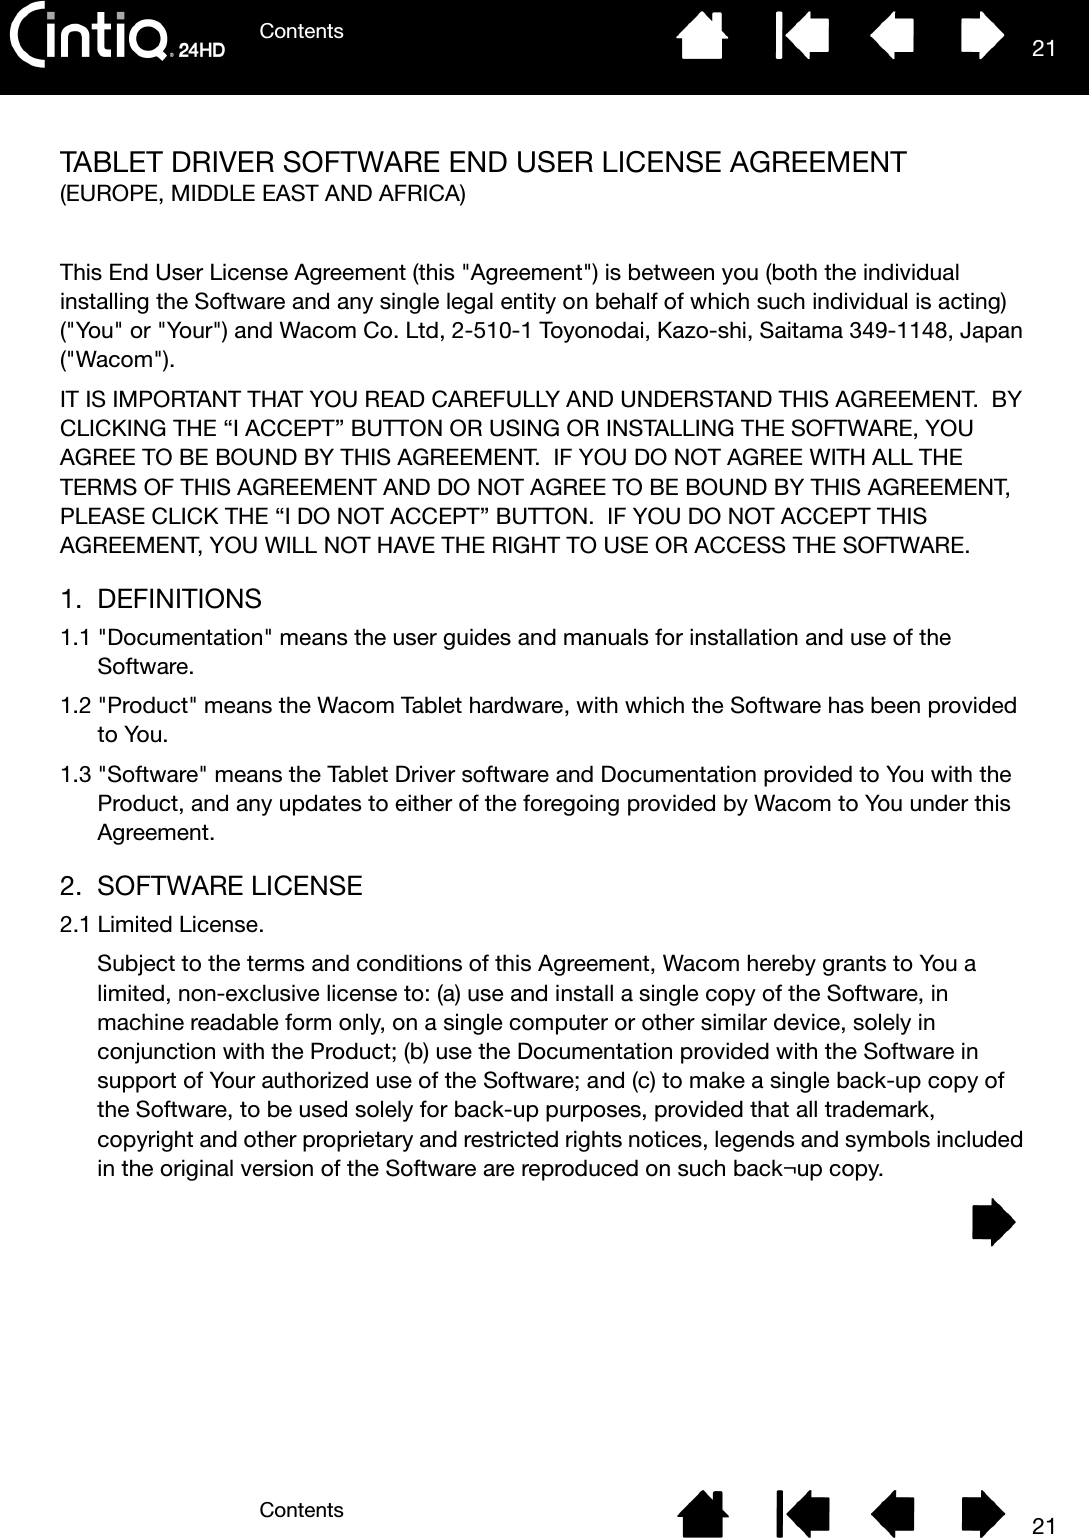 ContentsContents 2121TABLET DRIVER SOFTWARE END USER LICENSE AGREEMENT(EUROPE, MIDDLE EAST AND AFRICA) This End User License Agreement (this &quot;Agreement&quot;) is between you (both the individual installing the Software and any single legal entity on behalf of which such individual is acting) (&quot;You&quot; or &quot;Your&quot;) and Wacom Co. Ltd, 2-510-1 Toyonodai, Kazo-shi, Saitama 349-1148, Japan (&quot;Wacom&quot;). IT IS IMPORTANT THAT YOU READ CAREFULLY AND UNDERSTAND THIS AGREEMENT.  BY CLICKING THE “I ACCEPT” BUTTON OR USING OR INSTALLING THE SOFTWARE, YOU AGREE TO BE BOUND BY THIS AGREEMENT.  IF YOU DO NOT AGREE WITH ALL THE TERMS OF THIS AGREEMENT AND DO NOT AGREE TO BE BOUND BY THIS AGREEMENT, PLEASE CLICK THE “I DO NOT ACCEPT” BUTTON.  IF YOU DO NOT ACCEPT THIS AGREEMENT, YOU WILL NOT HAVE THE RIGHT TO USE OR ACCESS THE SOFTWARE.1. DEFINITIONS1.1 &quot;Documentation&quot; means the user guides and manuals for installation and use of the Software. 1.2 &quot;Product&quot; means the Wacom Tablet hardware, with which the Software has been provided to You. 1.3 &quot;Software&quot; means the Tablet Driver software and Documentation provided to You with the Product, and any updates to either of the foregoing provided by Wacom to You under this Agreement.2. SOFTWARE LICENSE2.1 Limited License.Subject to the terms and conditions of this Agreement, Wacom hereby grants to You a limited, non-exclusive license to: (a) use and install a single copy of the Software, in machine readable form only, on a single computer or other similar device, solely in conjunction with the Product; (b) use the Documentation provided with the Software in support of Your authorized use of the Software; and (c) to make a single back-up copy of the Software, to be used solely for back-up purposes, provided that all trademark, copyright and other proprietary and restricted rights notices, legends and symbols included in the original version of the Software are reproduced on such back¬up copy.